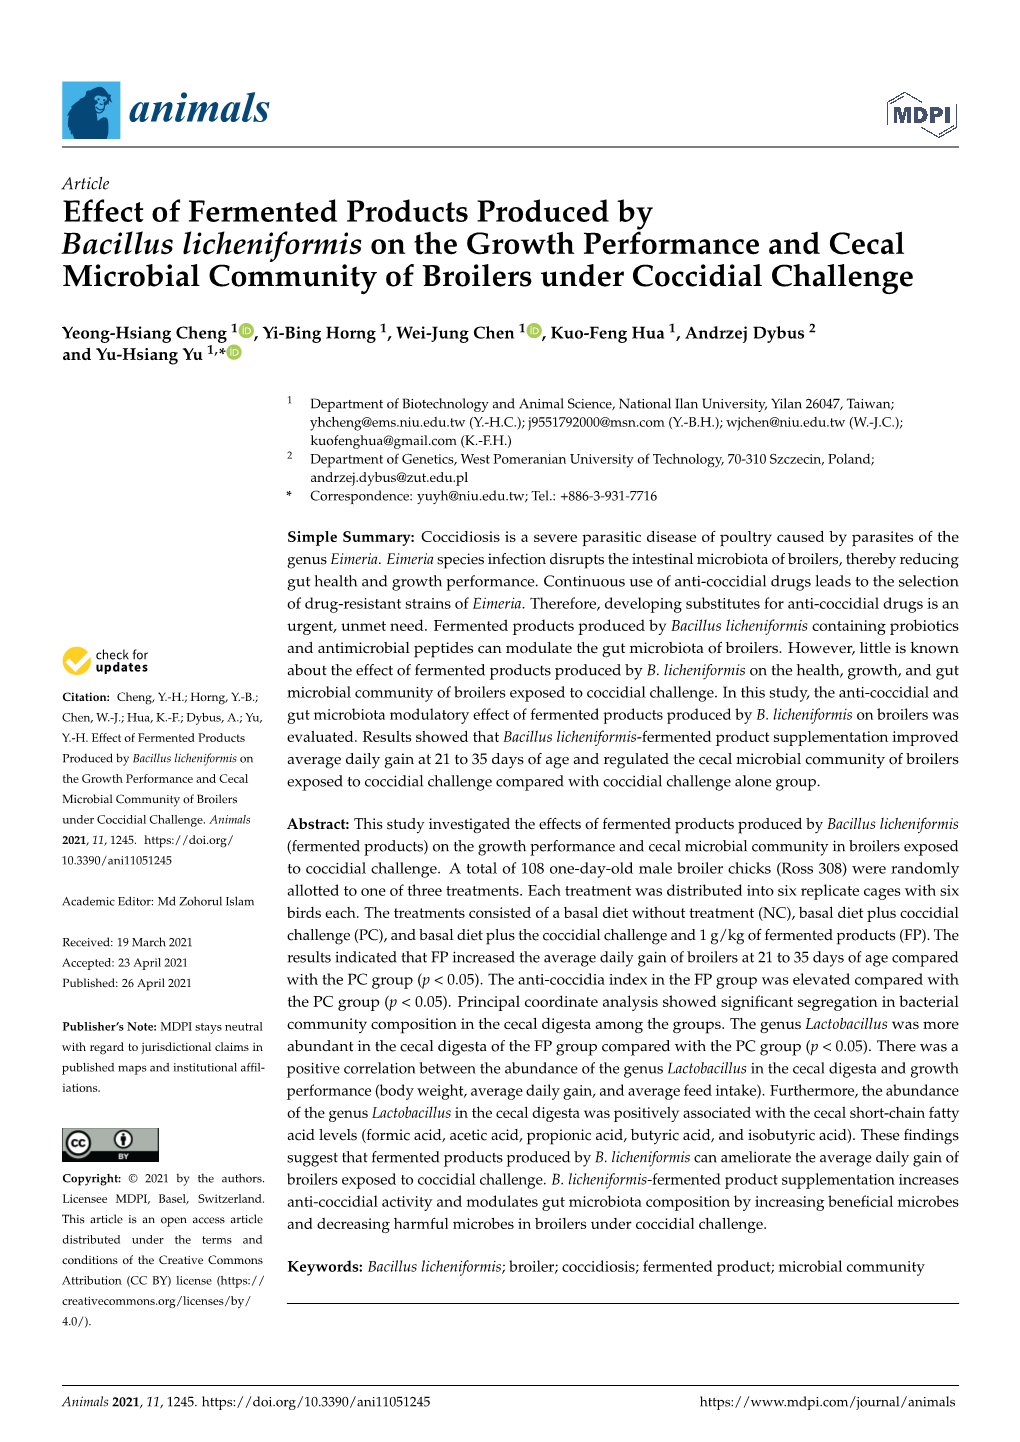 Effect of Fermented Products Produced by Bacillus Licheniformis on the Growth Performance and Cecal Microbial Community of Broilers Under Coccidial Challenge